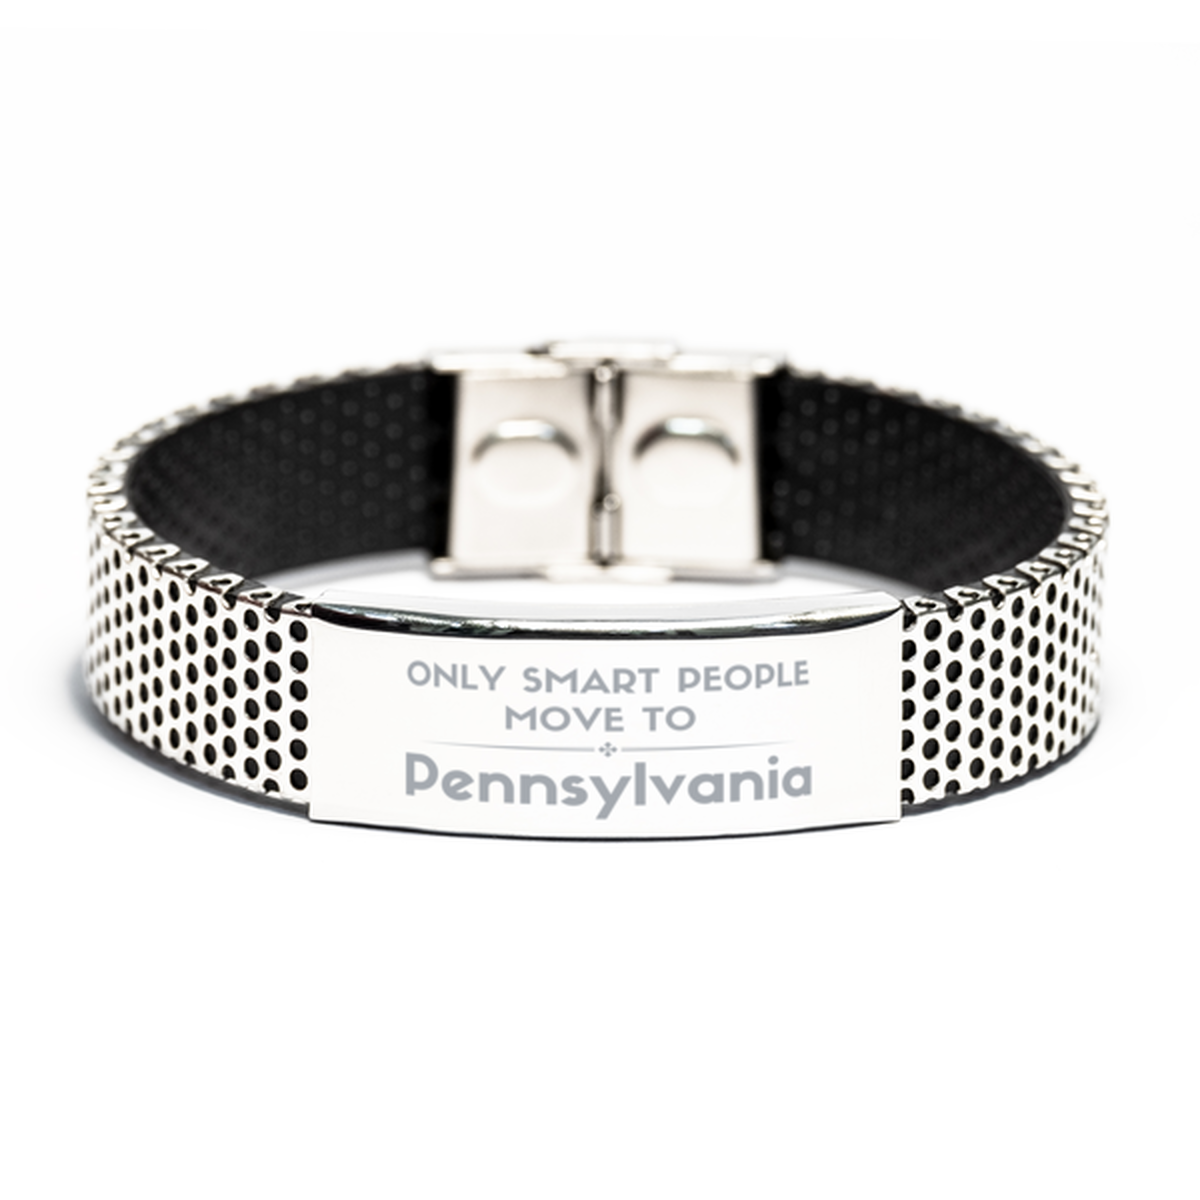 Only smart people move to Pennsylvania Stainless Steel Bracelet, Gag Gifts For Pennsylvania, Move to Pennsylvania Gifts for Friends Coworker Funny Saying Quote